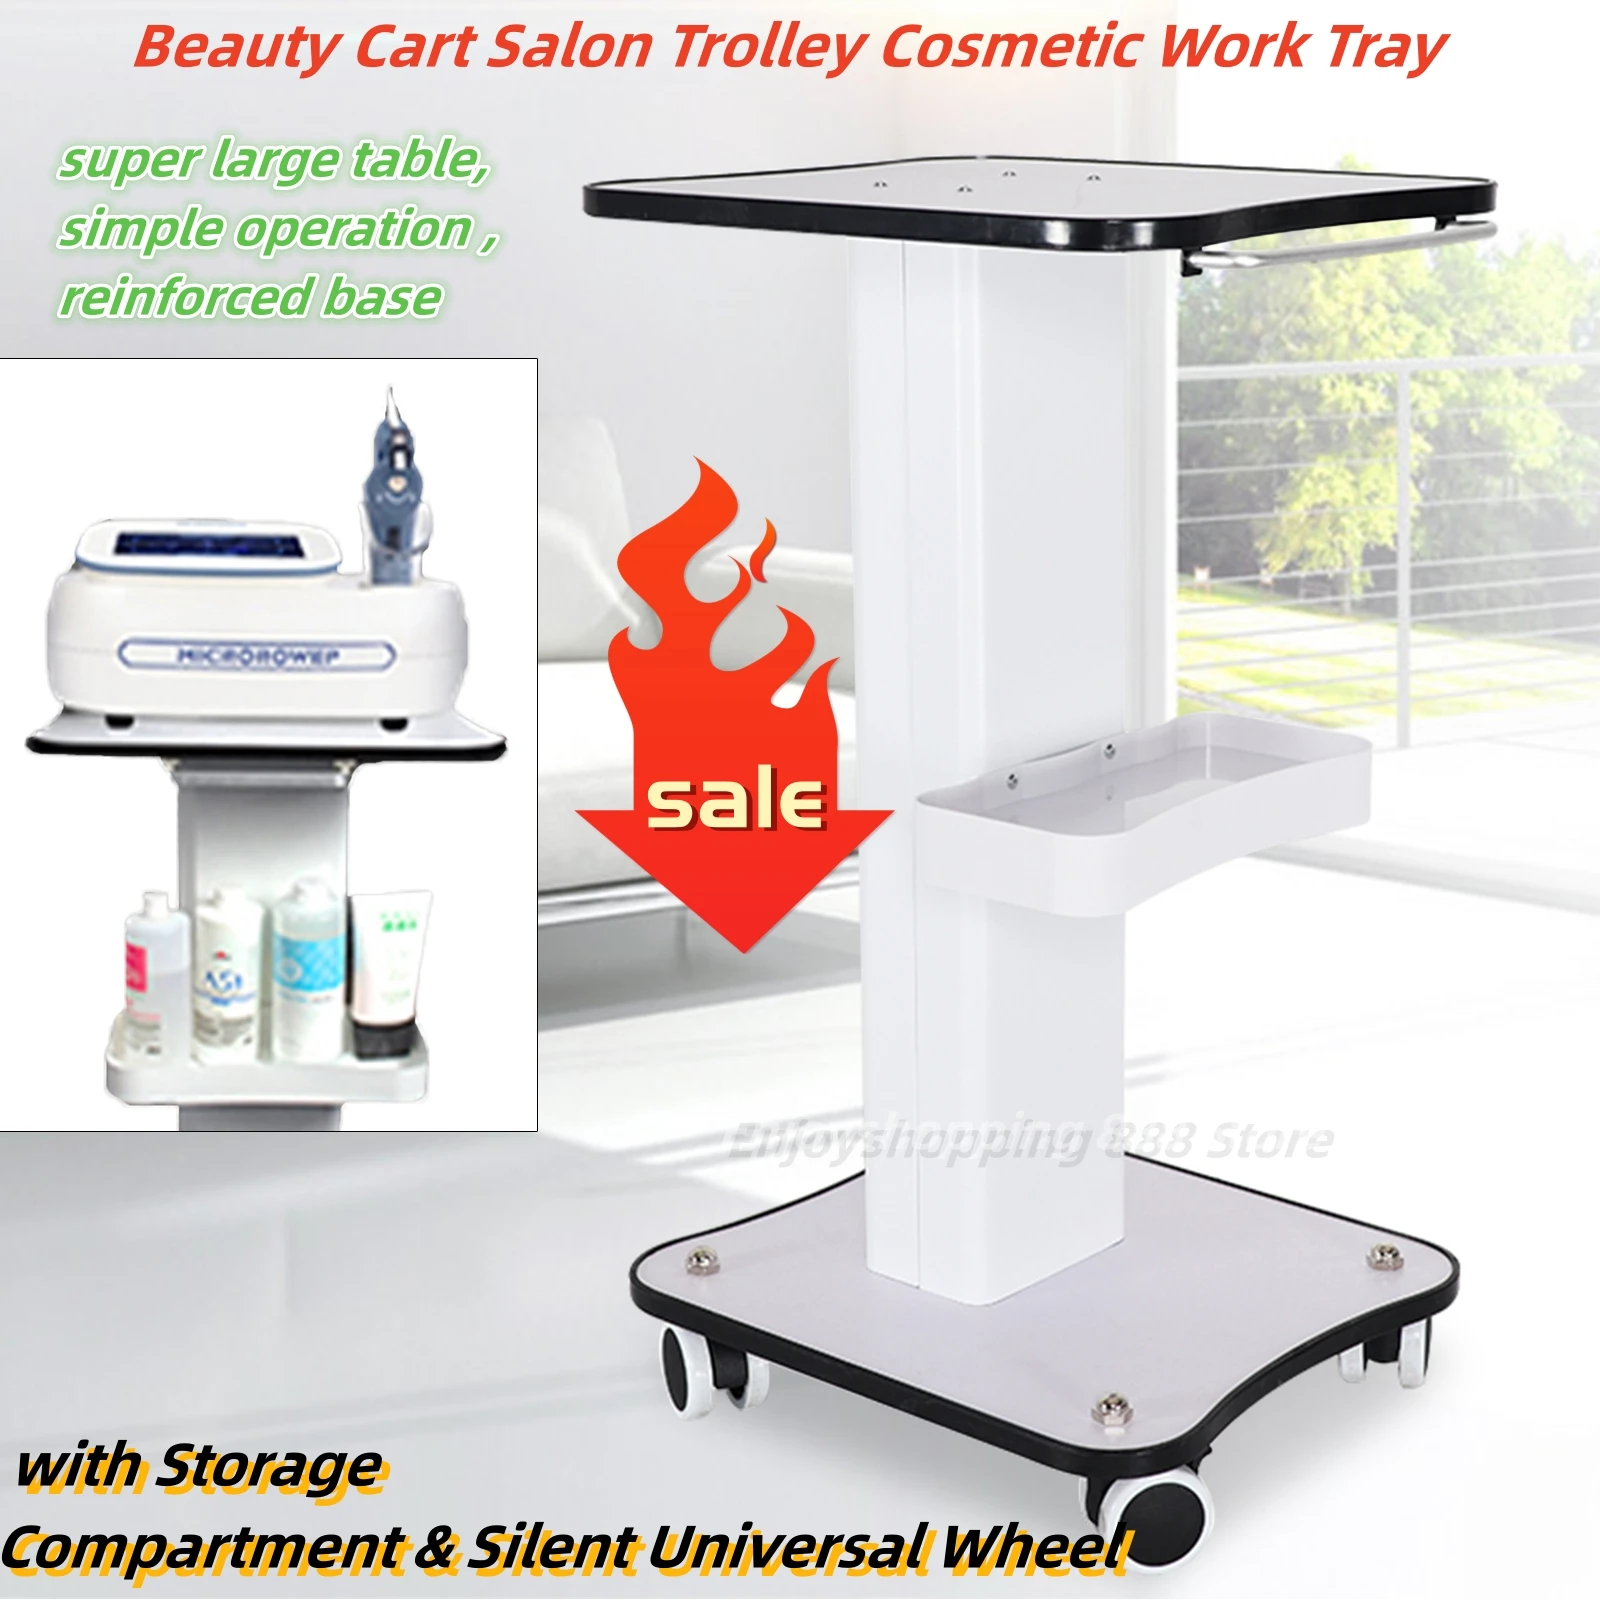 Beauty Cart Salon Trolley Cosmetic Work Tray with Storage Compartment & Silent Universal Wheel w013 trolley case universal wheel casters suitcase carrier wheel trolley suitcase wheel silent detachable replacement repair set